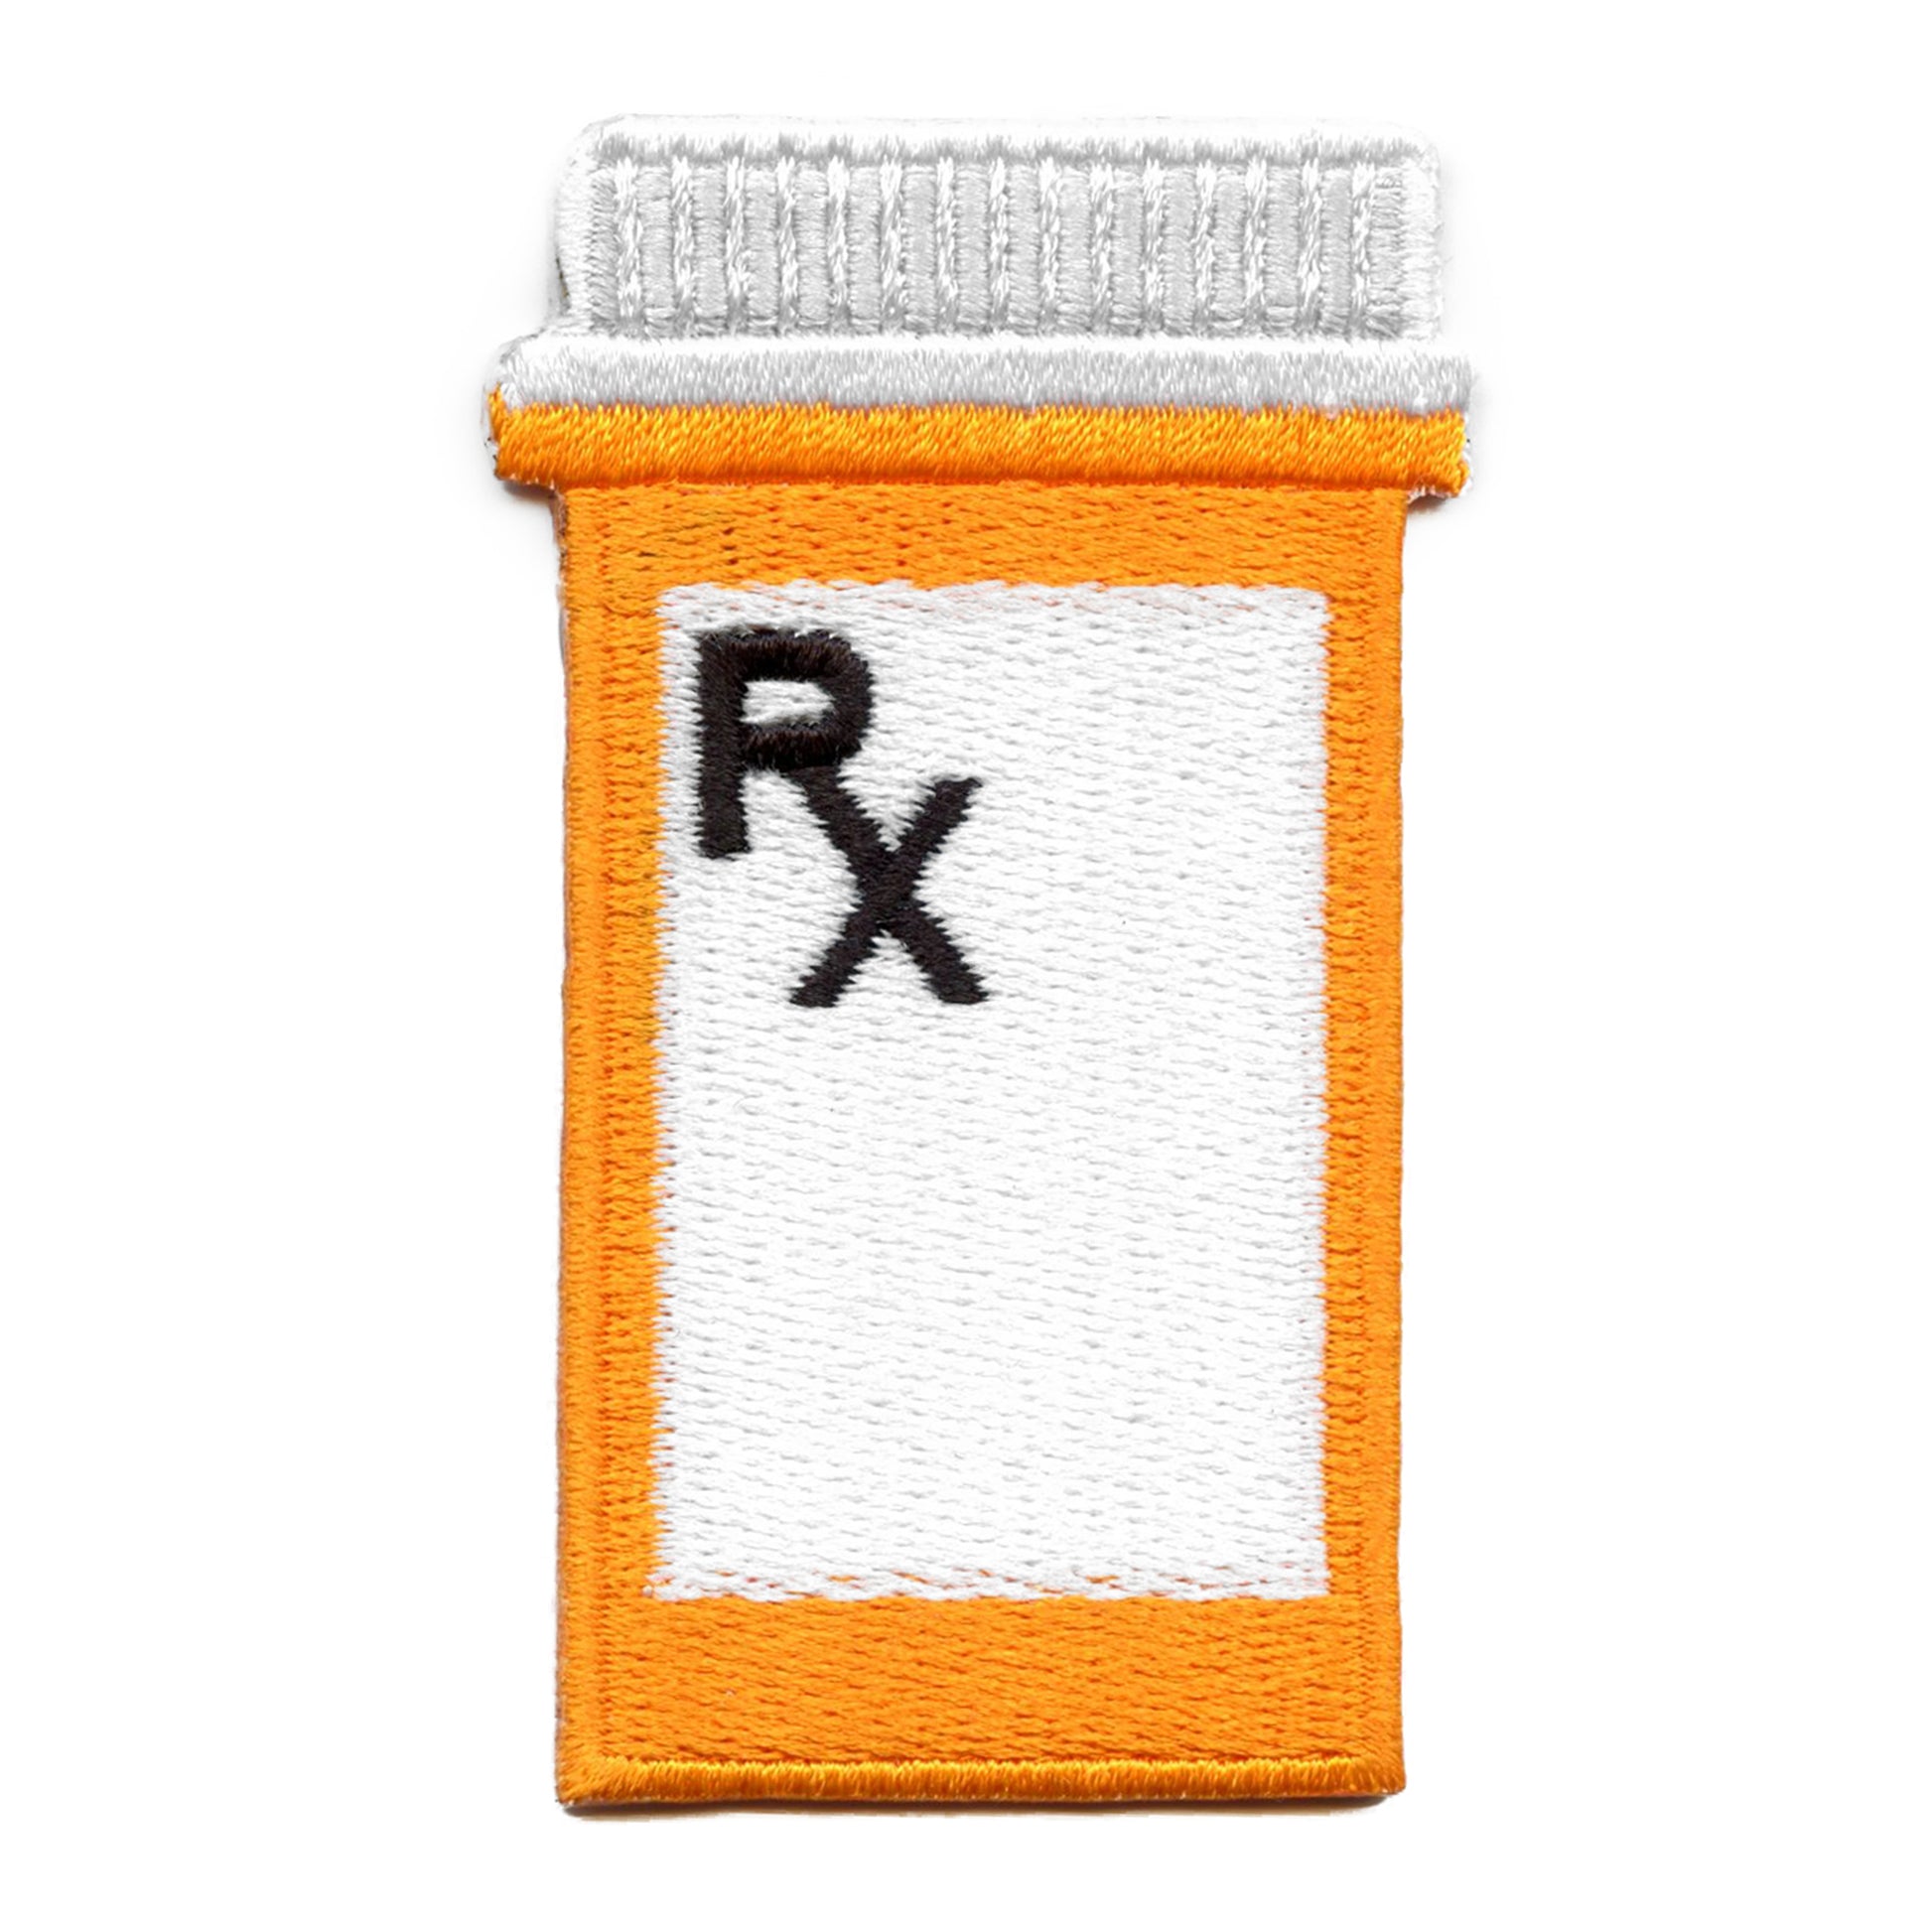 RX Pharmaceutical Prescription Bottle Patch Medication Health Embroidered Iron On 